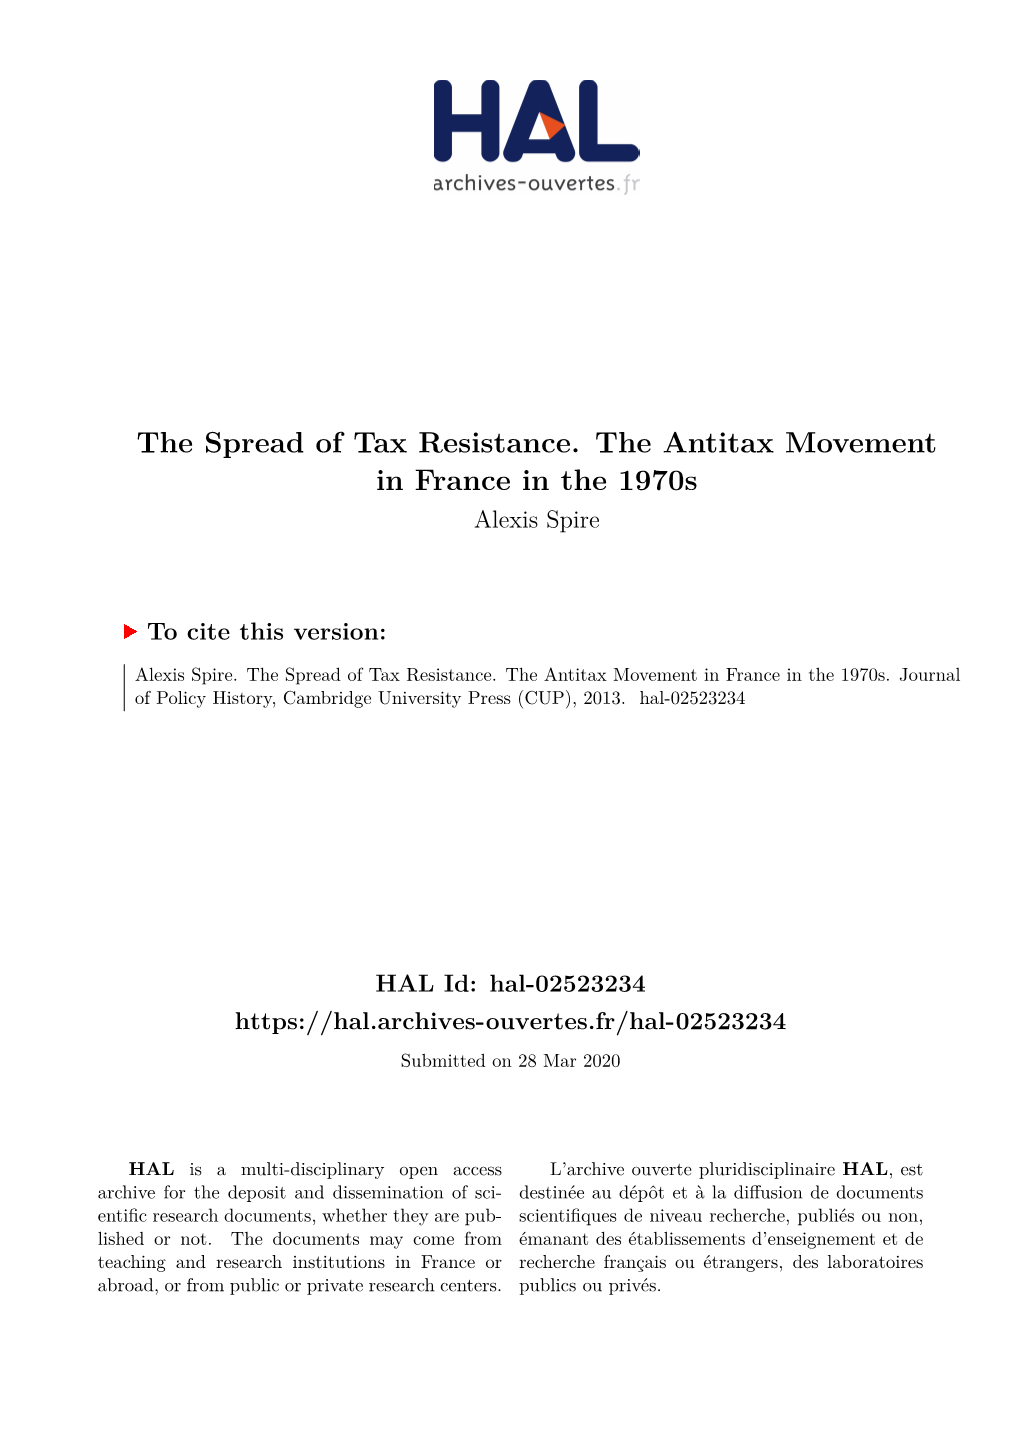 The Spread of Tax Resistance. the Antitax Movement in France in the 1970S Alexis Spire